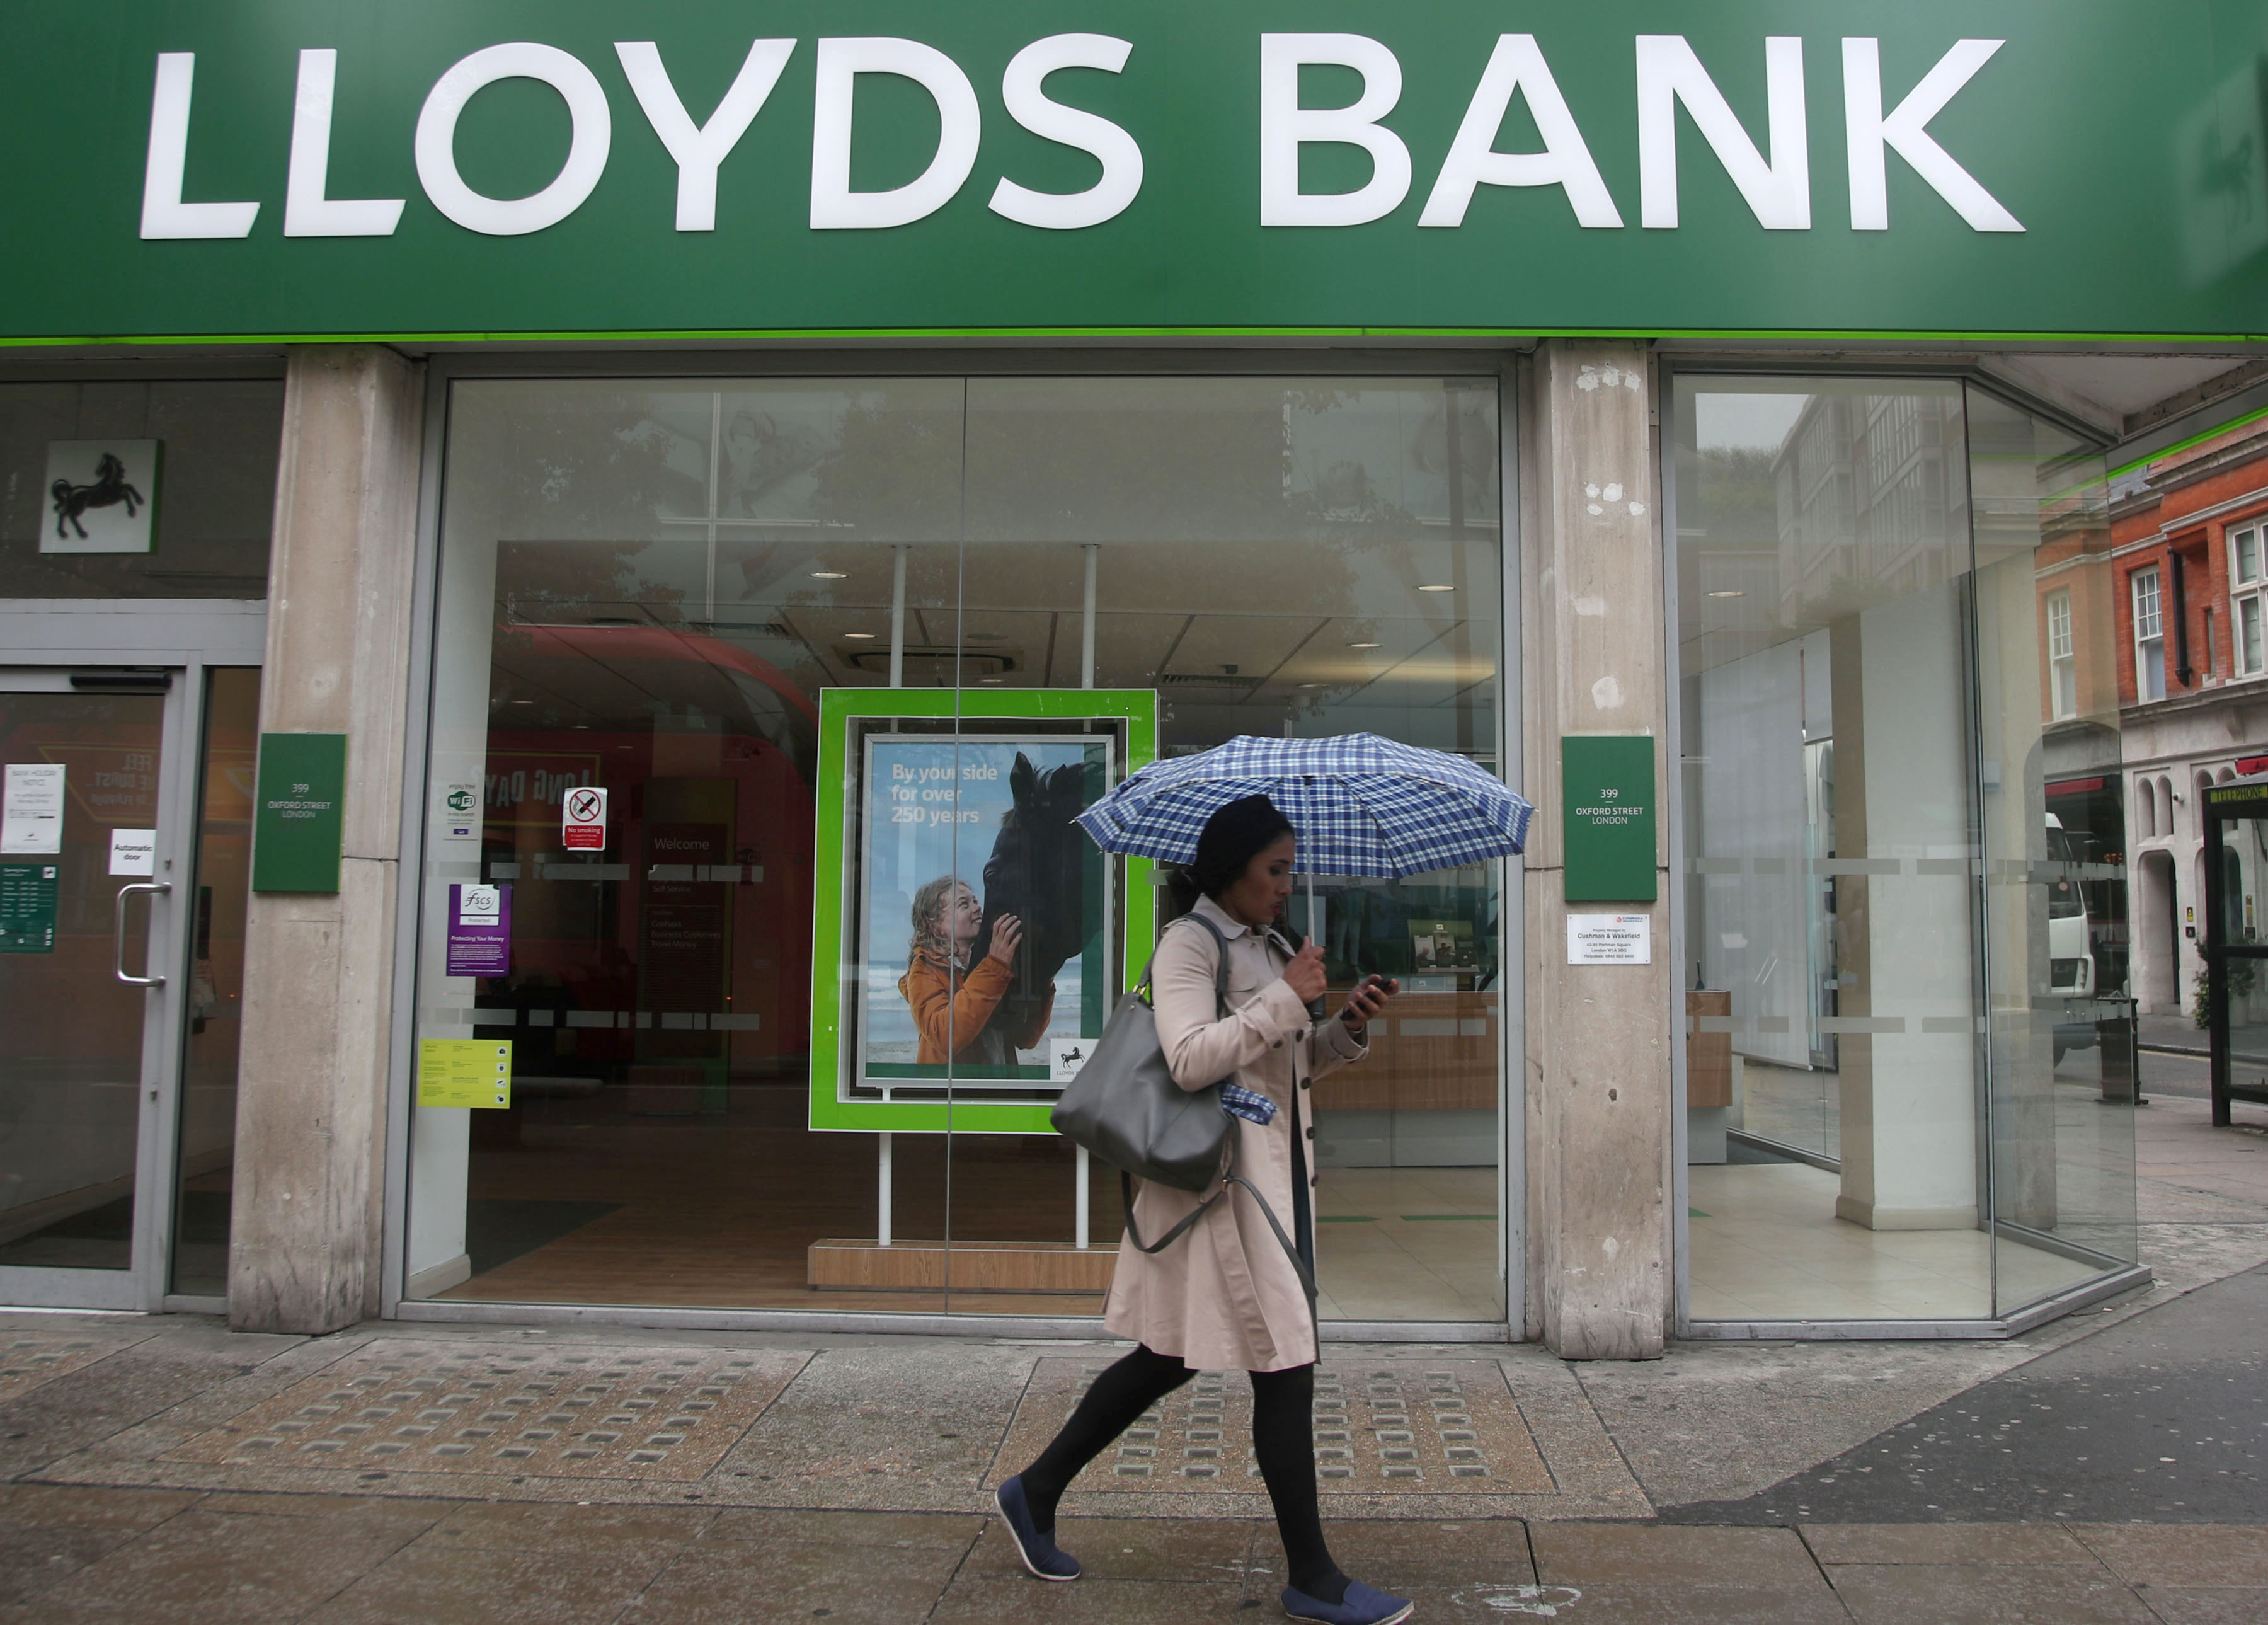 Lloyds bank confirmed it is to axe 6,240 jobs | Morning Star